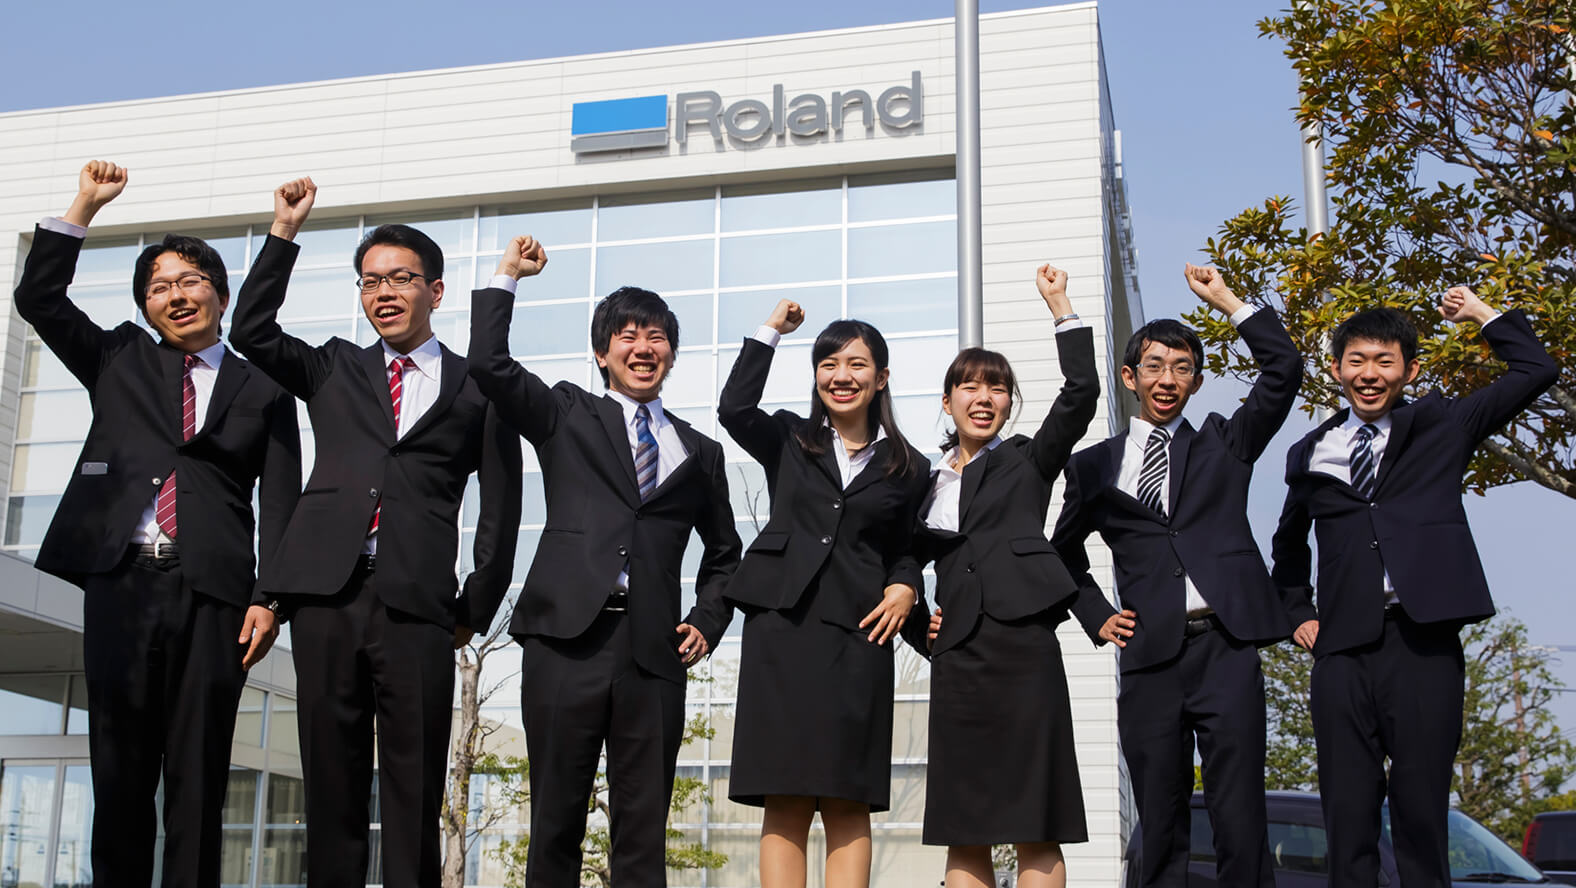 Roland DG's seven new employees for FY2018